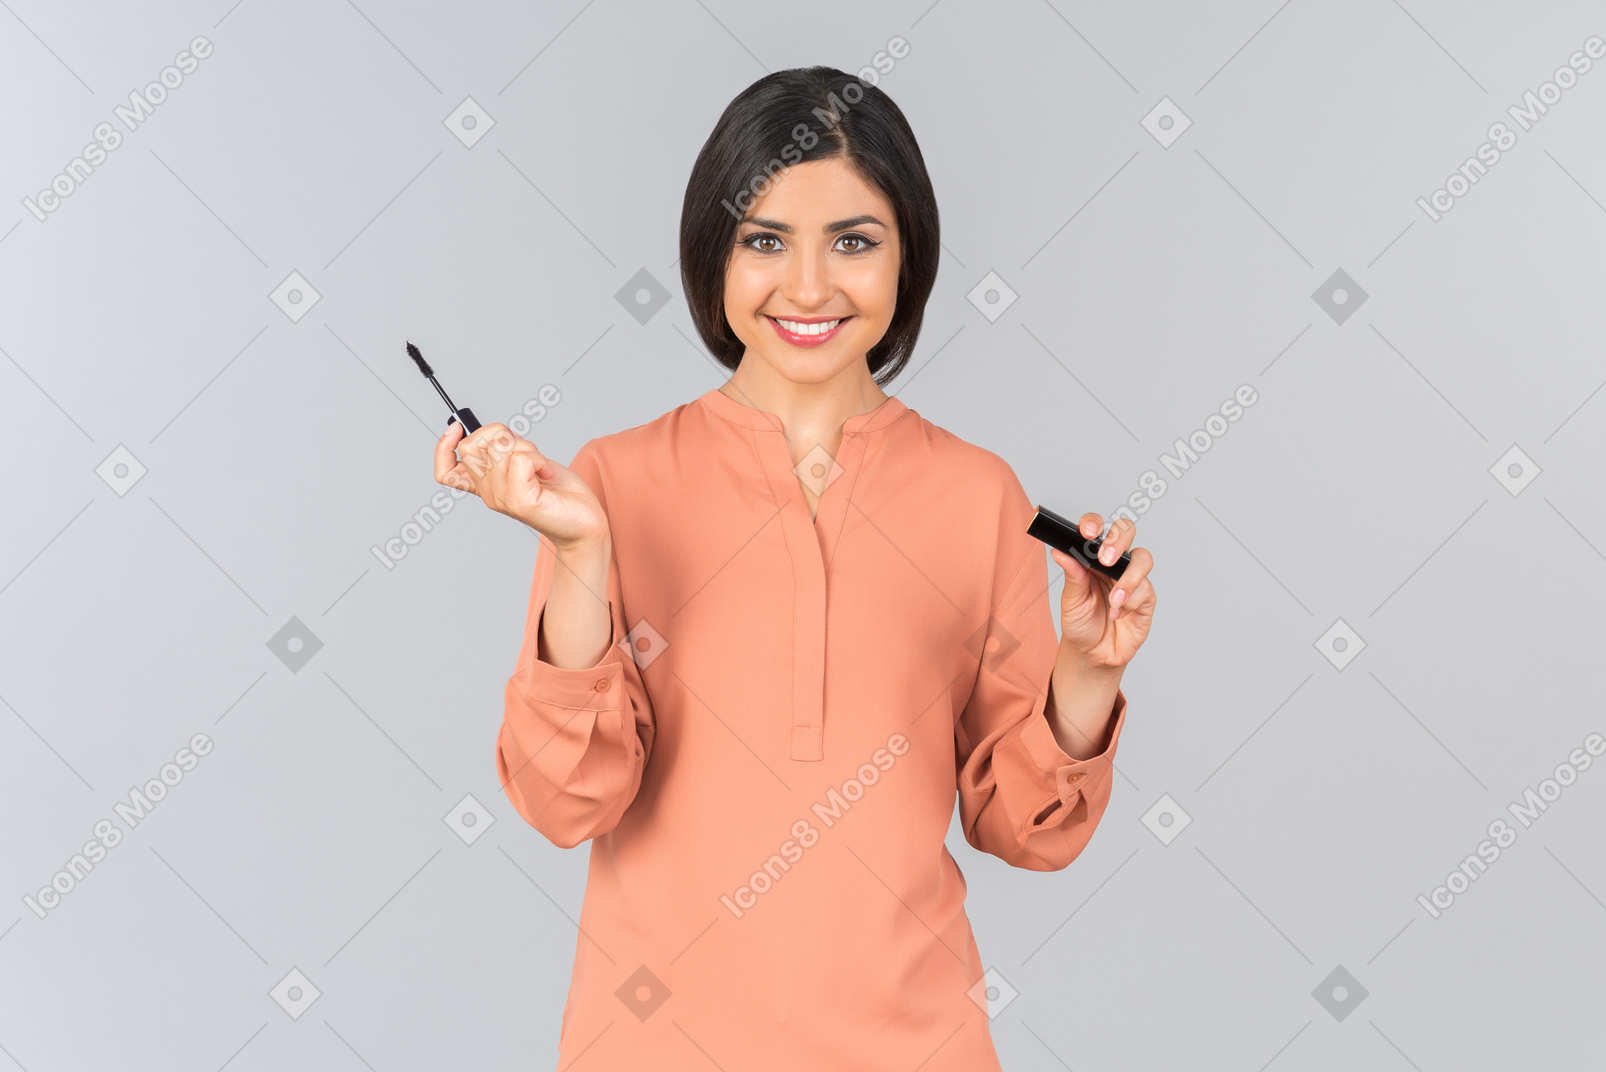 Dreamy looking indian woman holding mascara